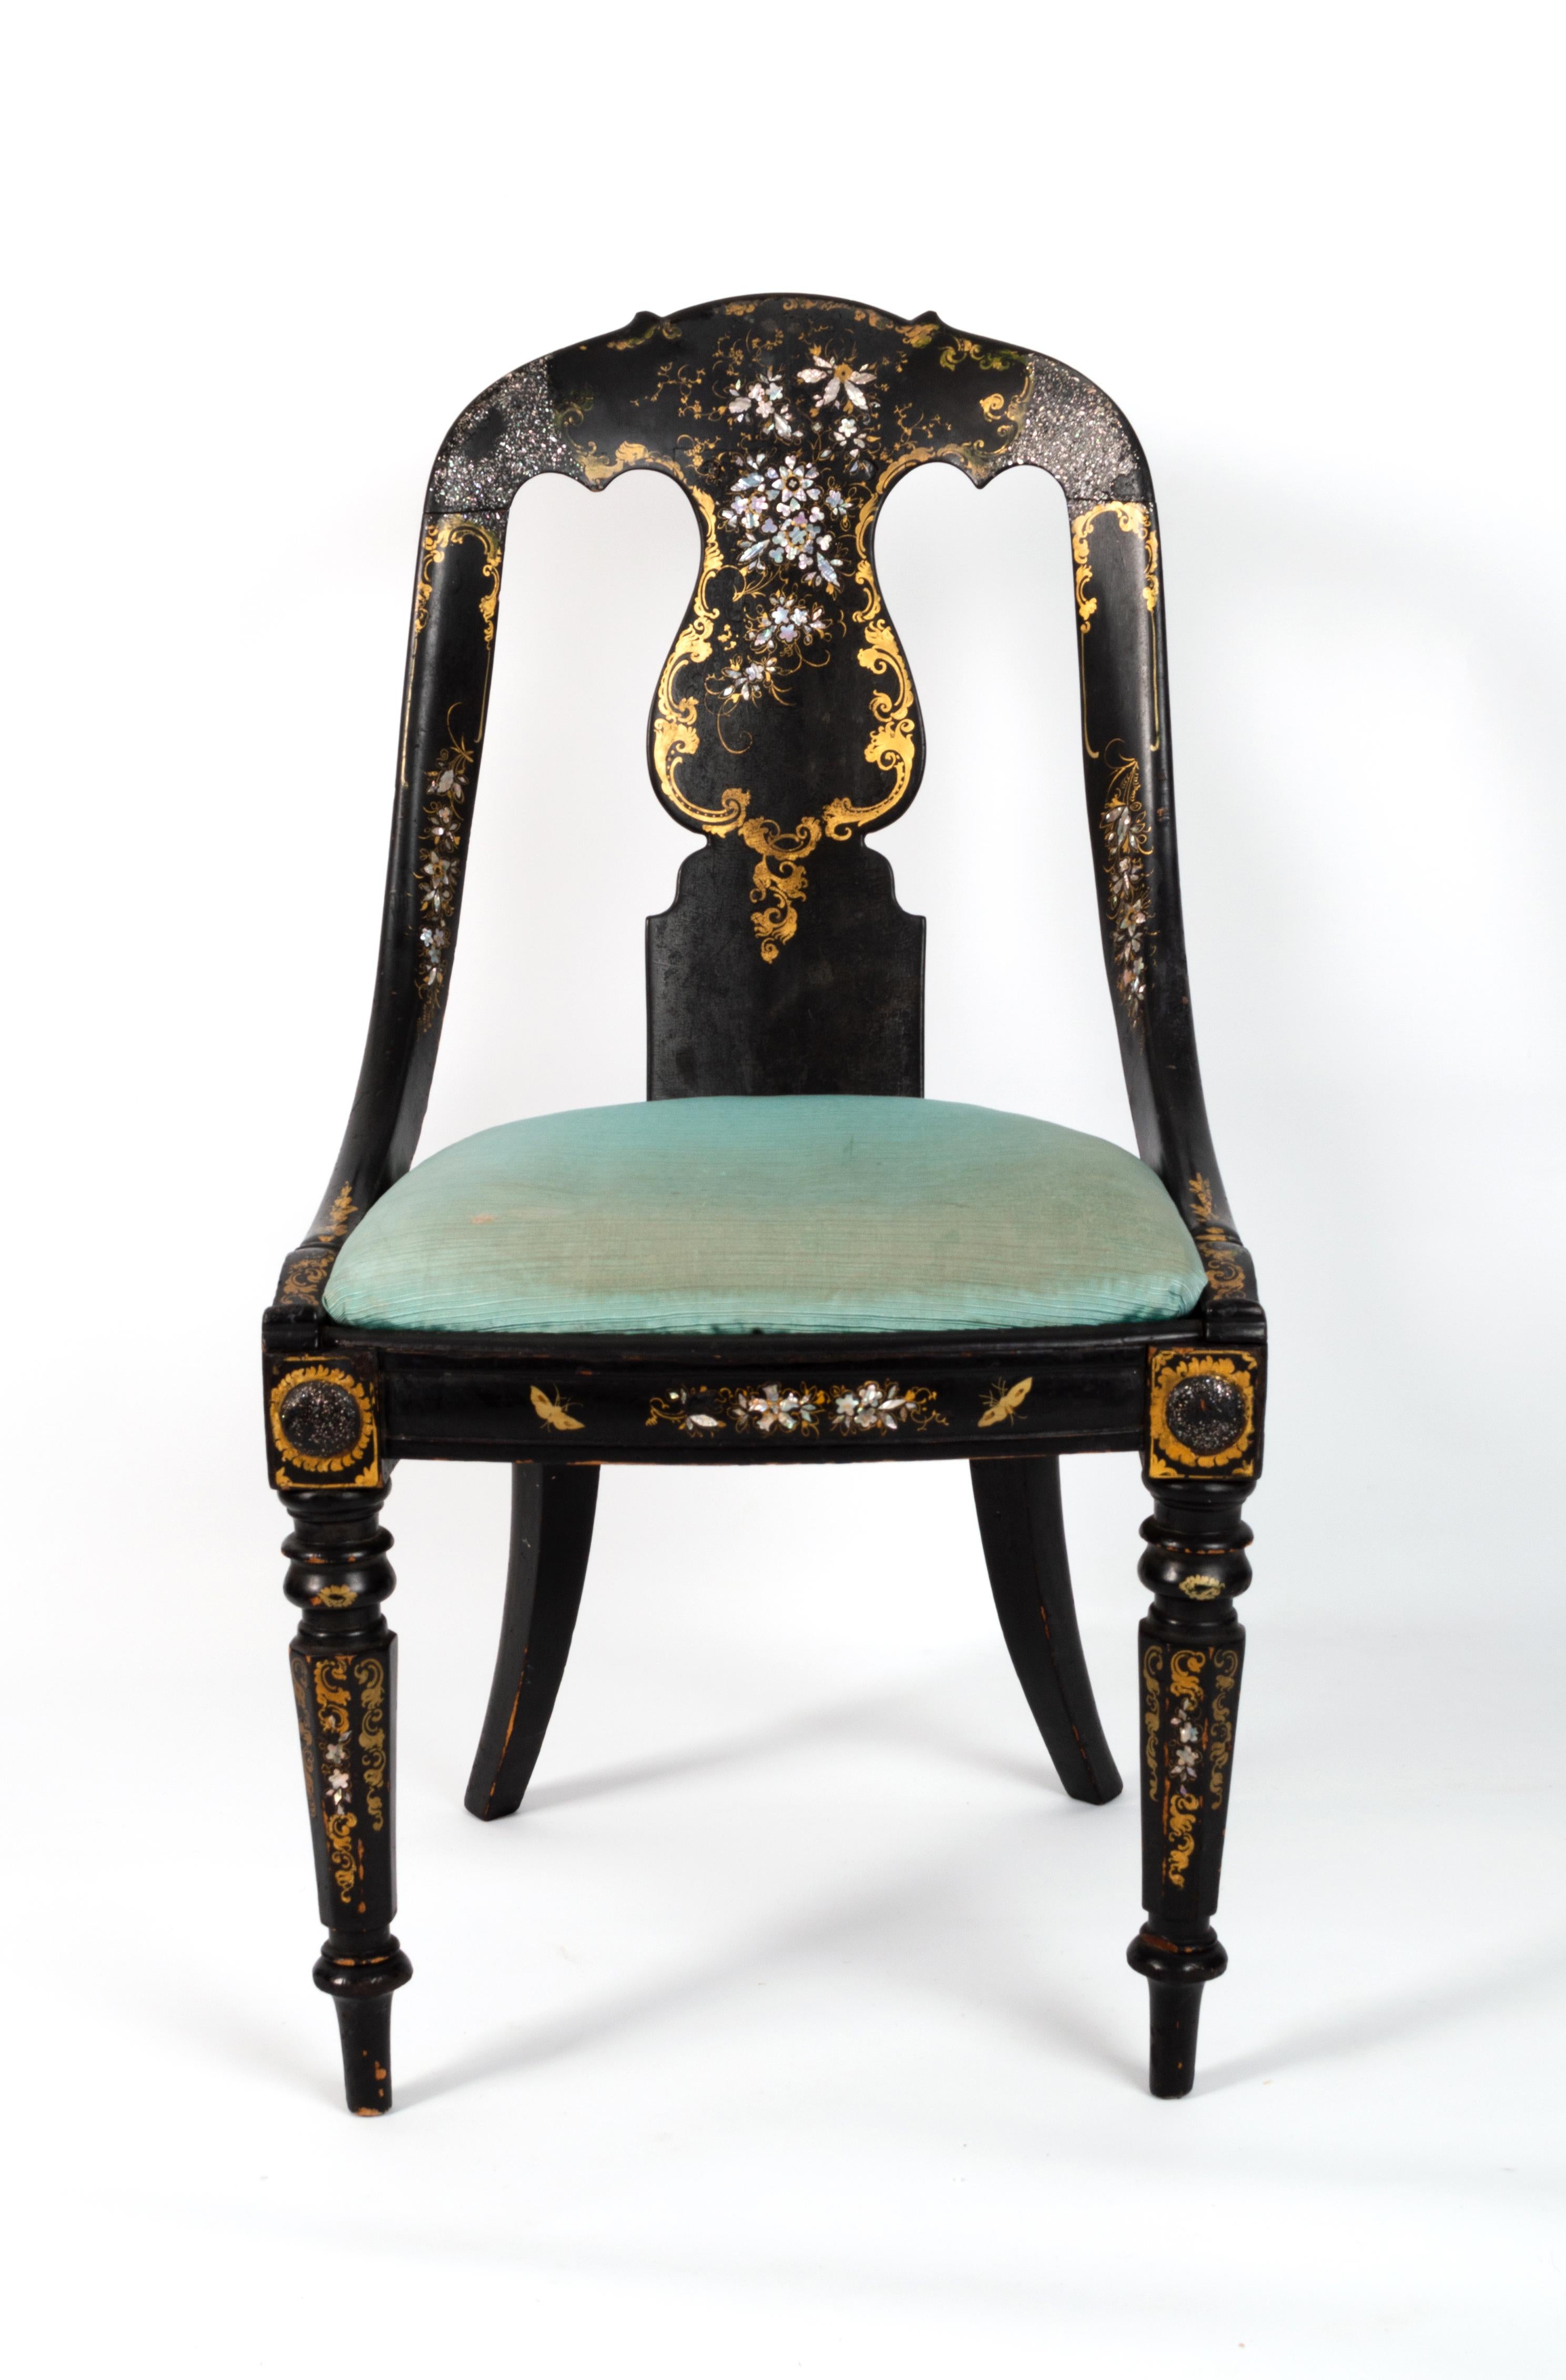 Antique English 19th Century Lacquered Mother-of-Pearl Papier Machè Chair
William IV C.1830
Superb decorative chair, intricately inlaid with mother of pearl inlay and gilt detailing.

Drop in seat will require re-upholstery.